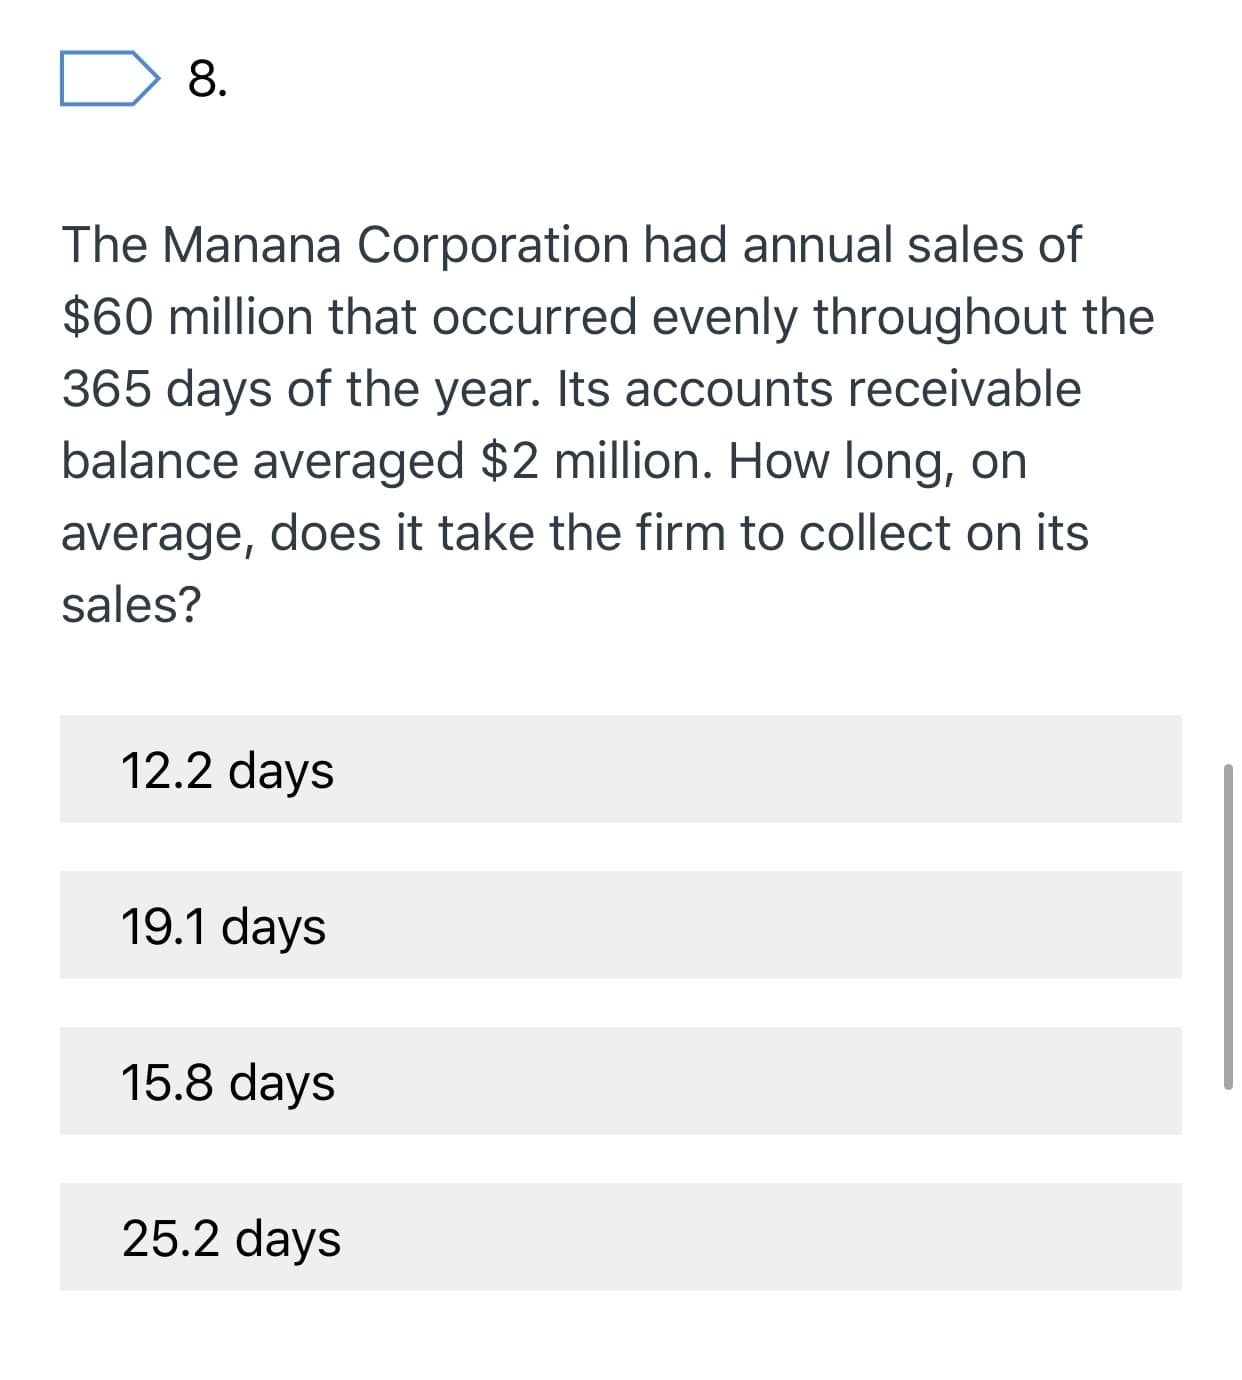 8
The Manana Corporation had annual sales of
$60 million that occurred evenly throughout the
365 days of the year. Its accounts receivable
balance averaged $2 million. How long, on
average, does it take the firm to collect on its
sales?
12.2 days
19.1 days
15.8 days
25.2 days
